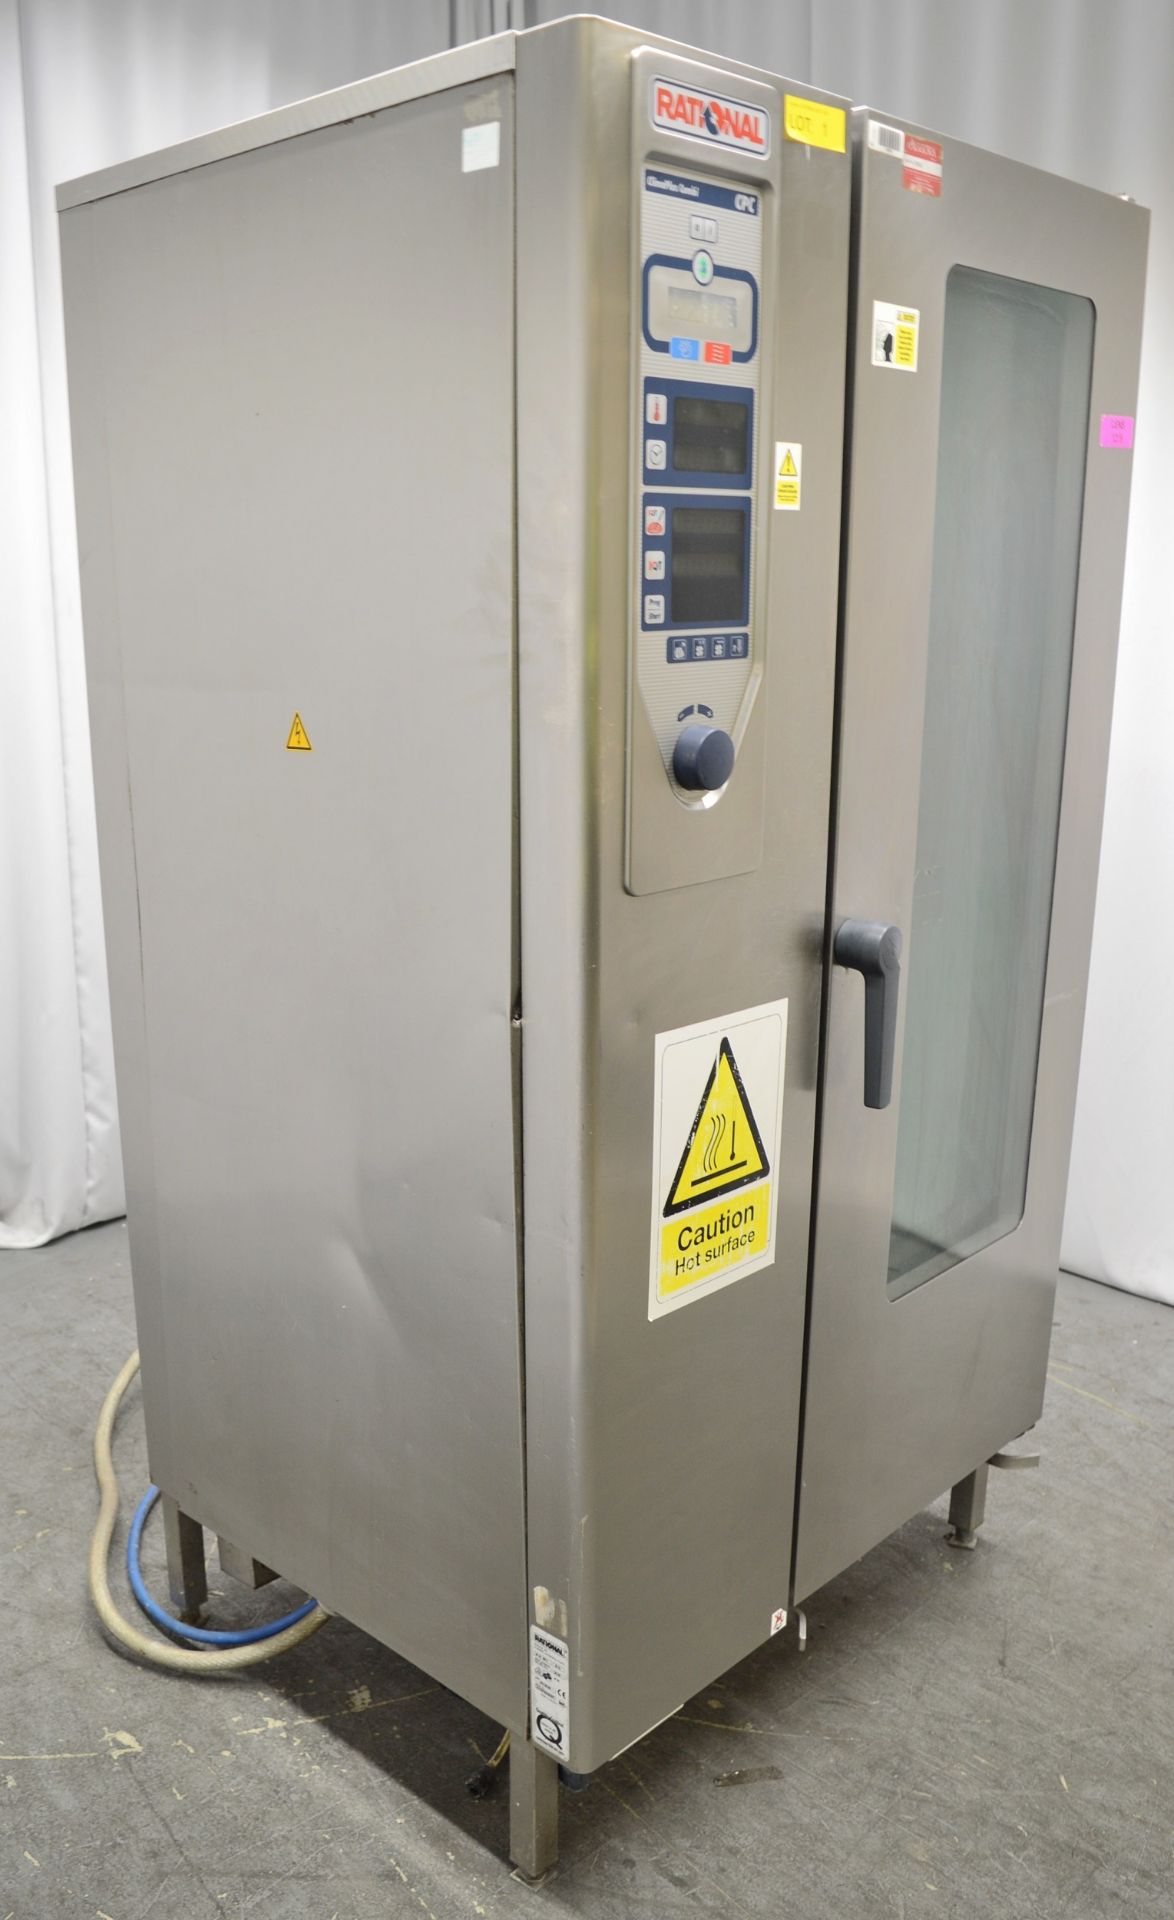 Rational CPC 201/04 20 Rack Combi Oven 3 Phase 38kW with Trolley. - Image 2 of 9